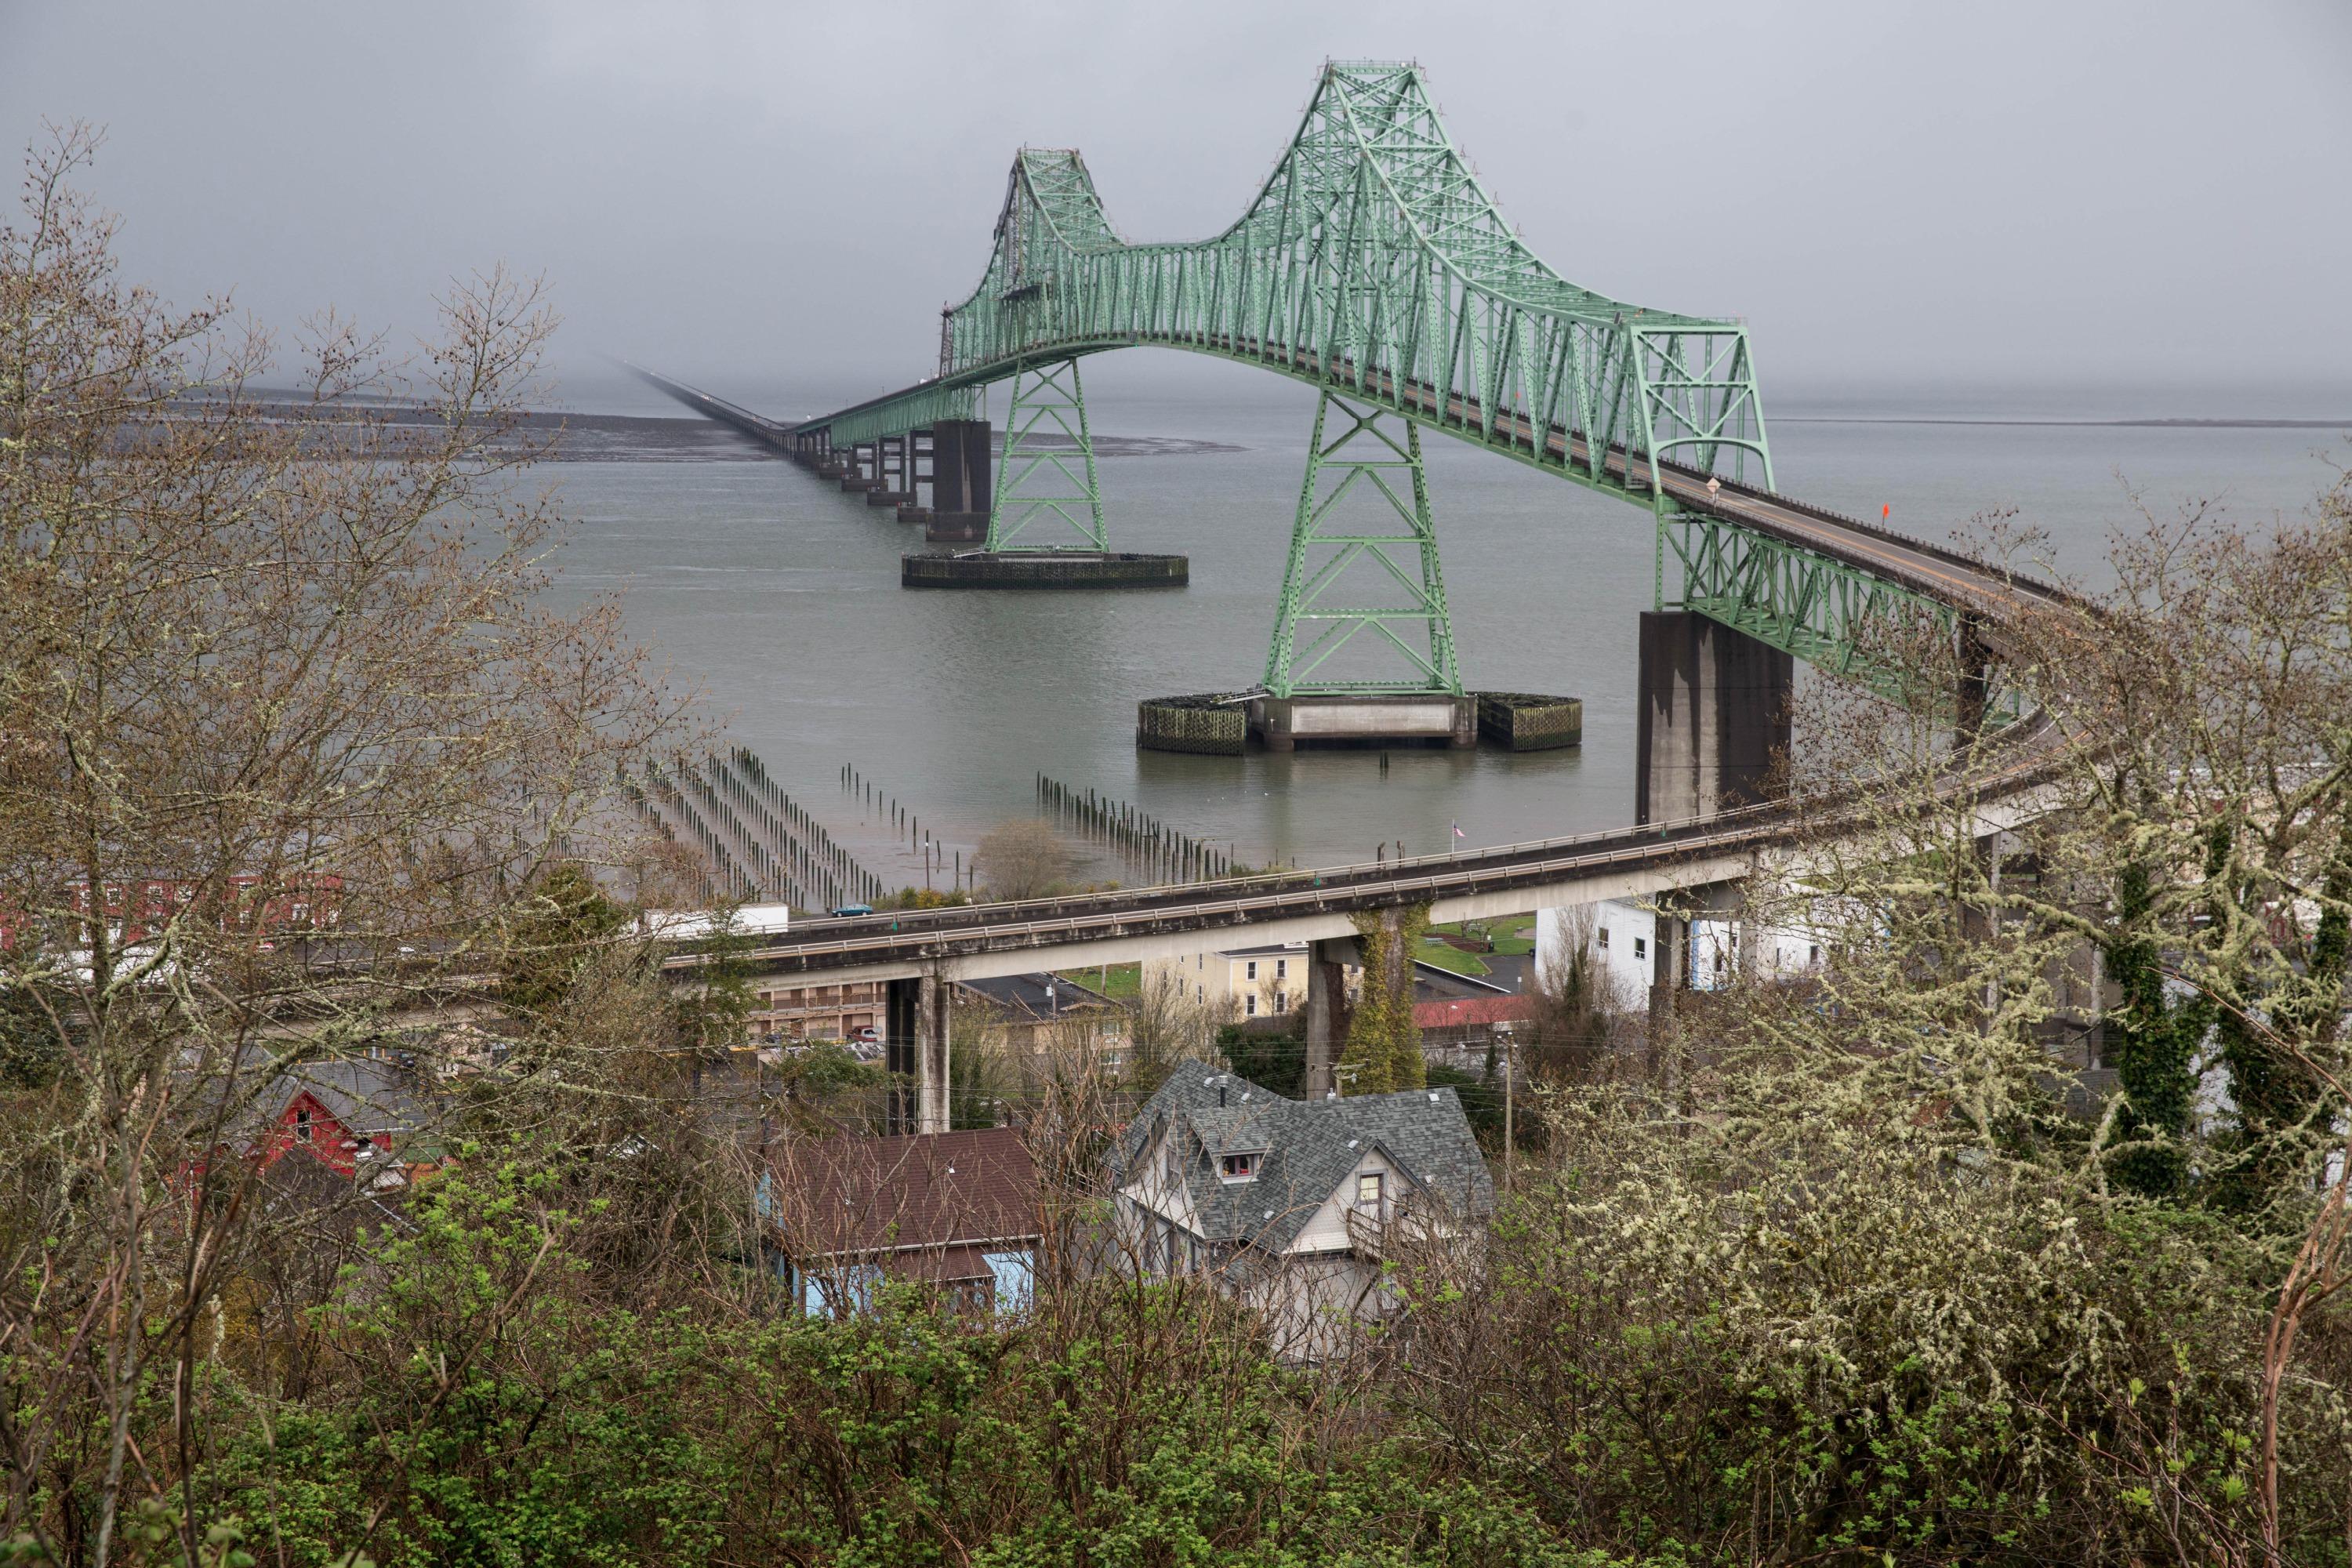 The Astoria-Megler bridge, designed by Conde McCullough, stretches 4.1 miles between Oregon and Washington. It has been featured in movies such as "The Kindergarten Cop," "Short Circuit" and "The Goonies."